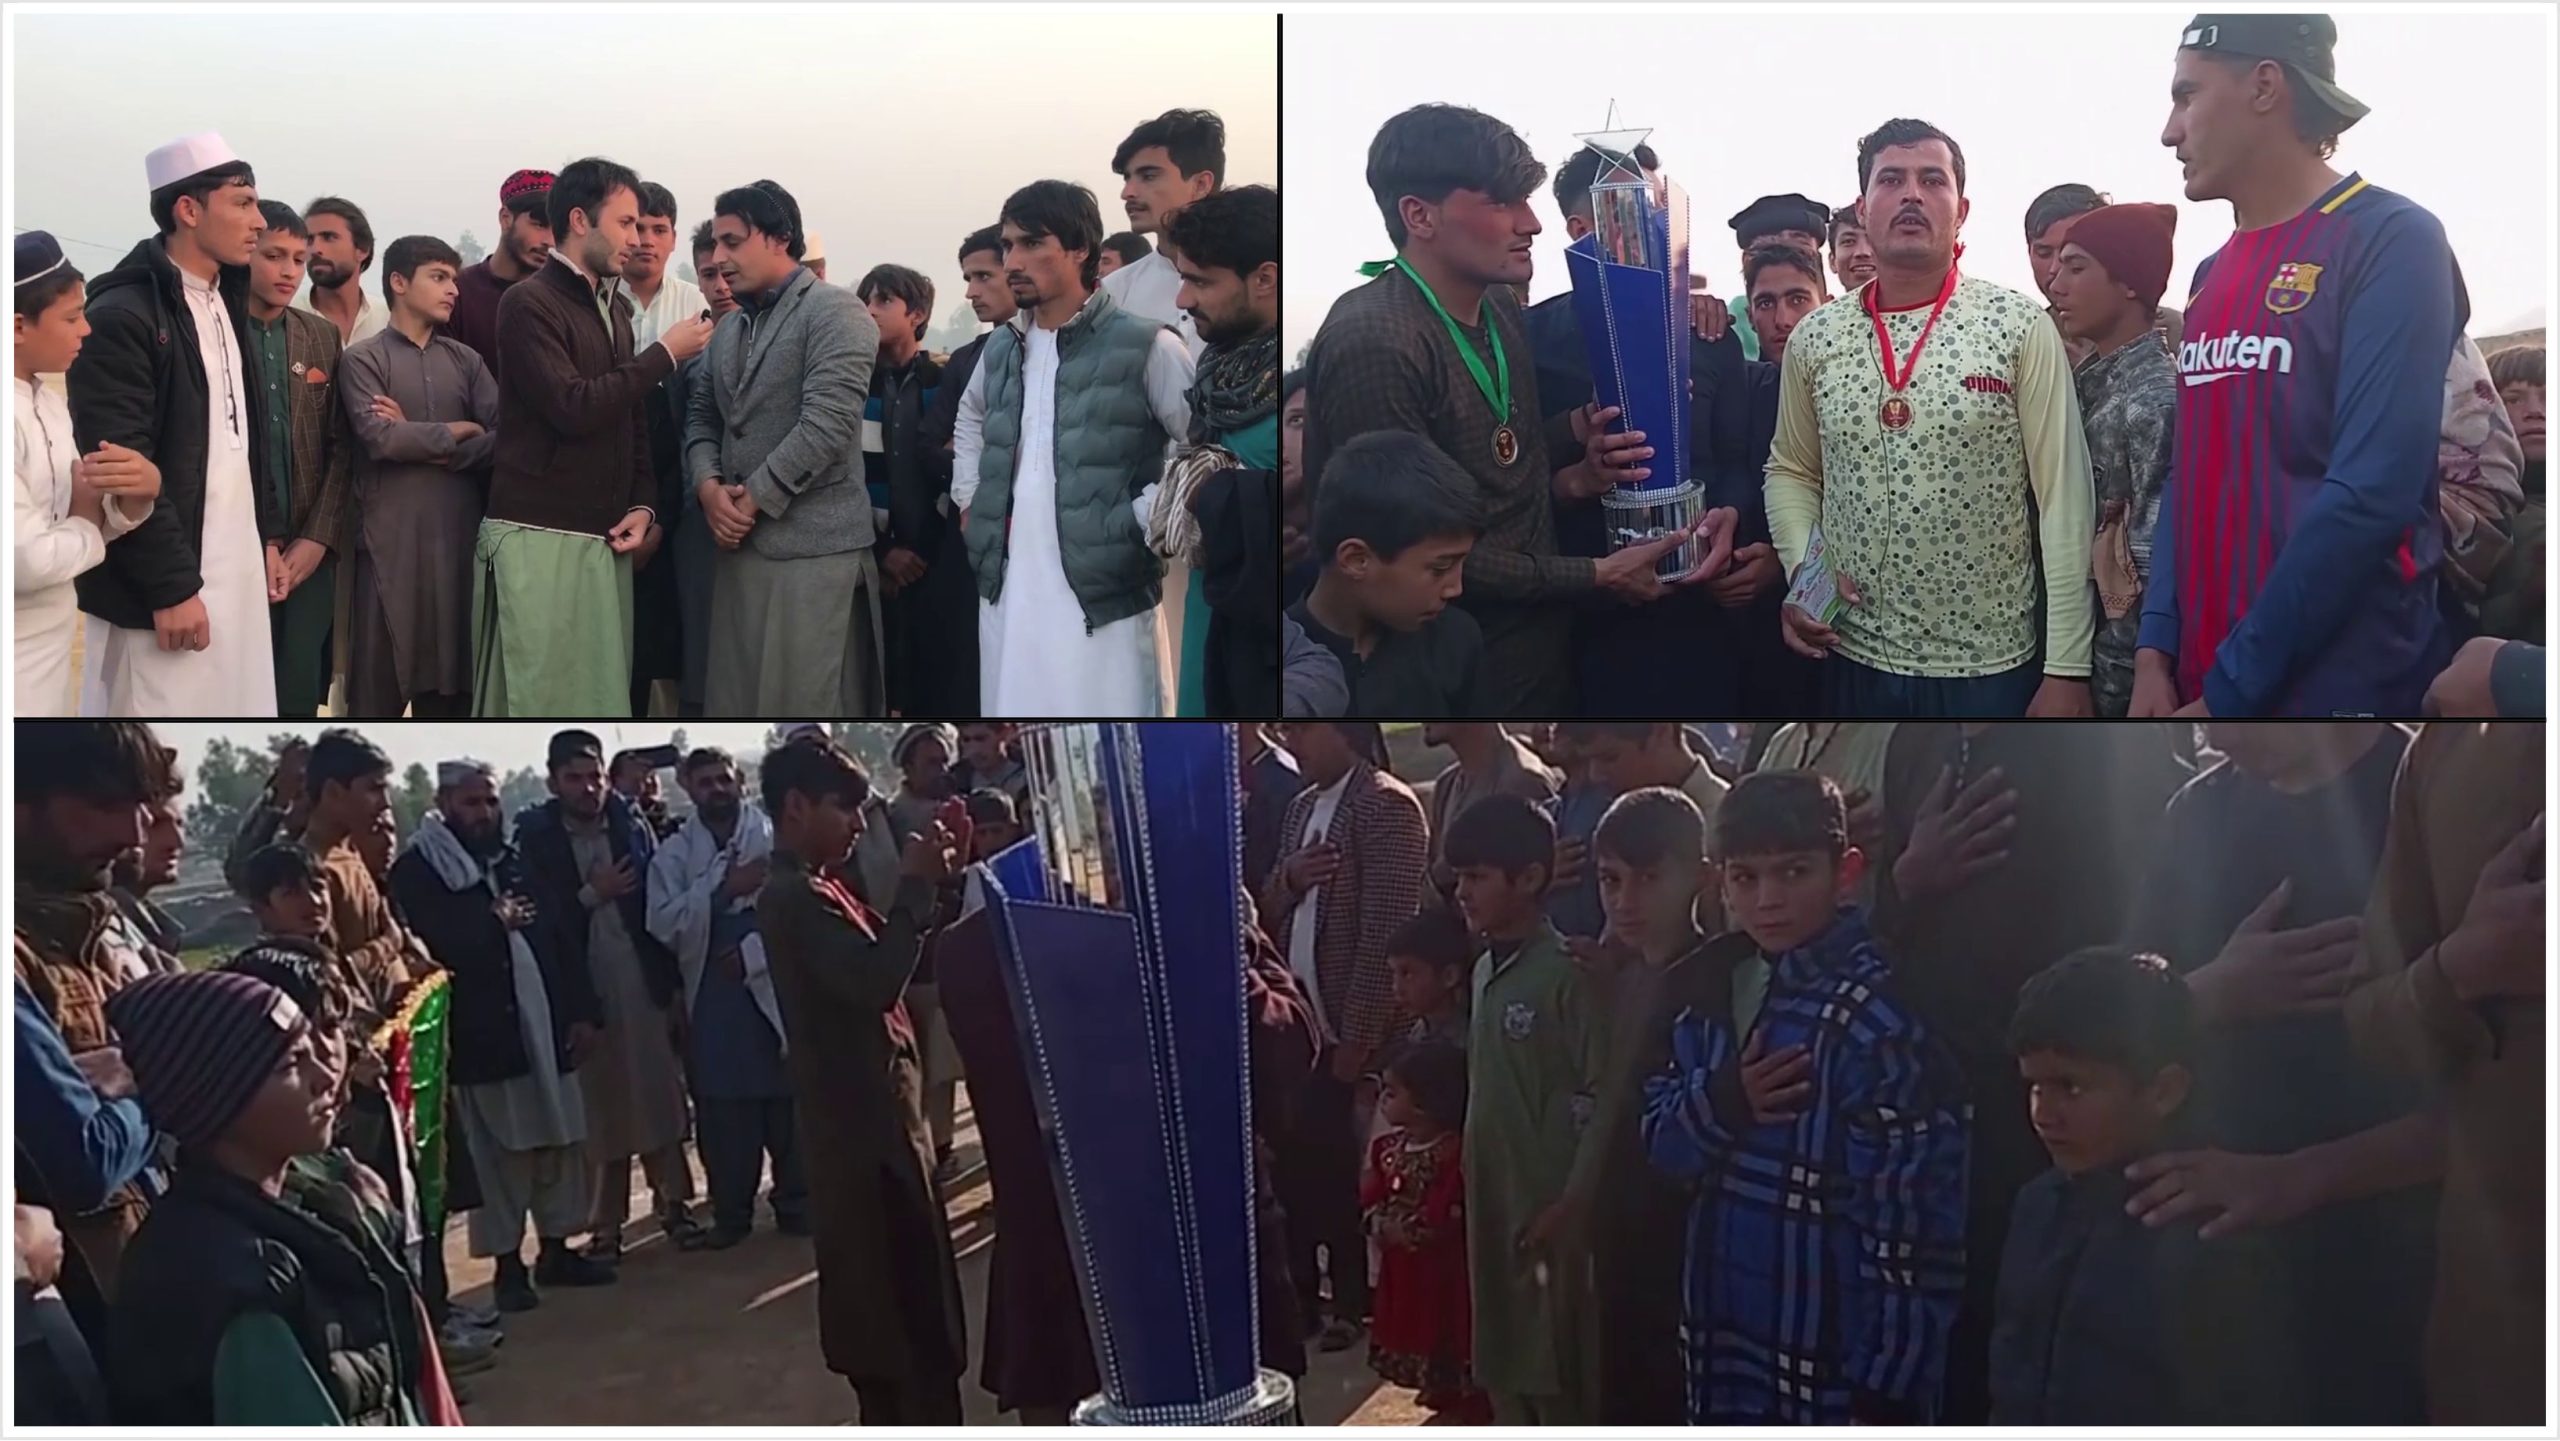 In Swabi Burki Camp youth have rented the land for cricket games at their own expense